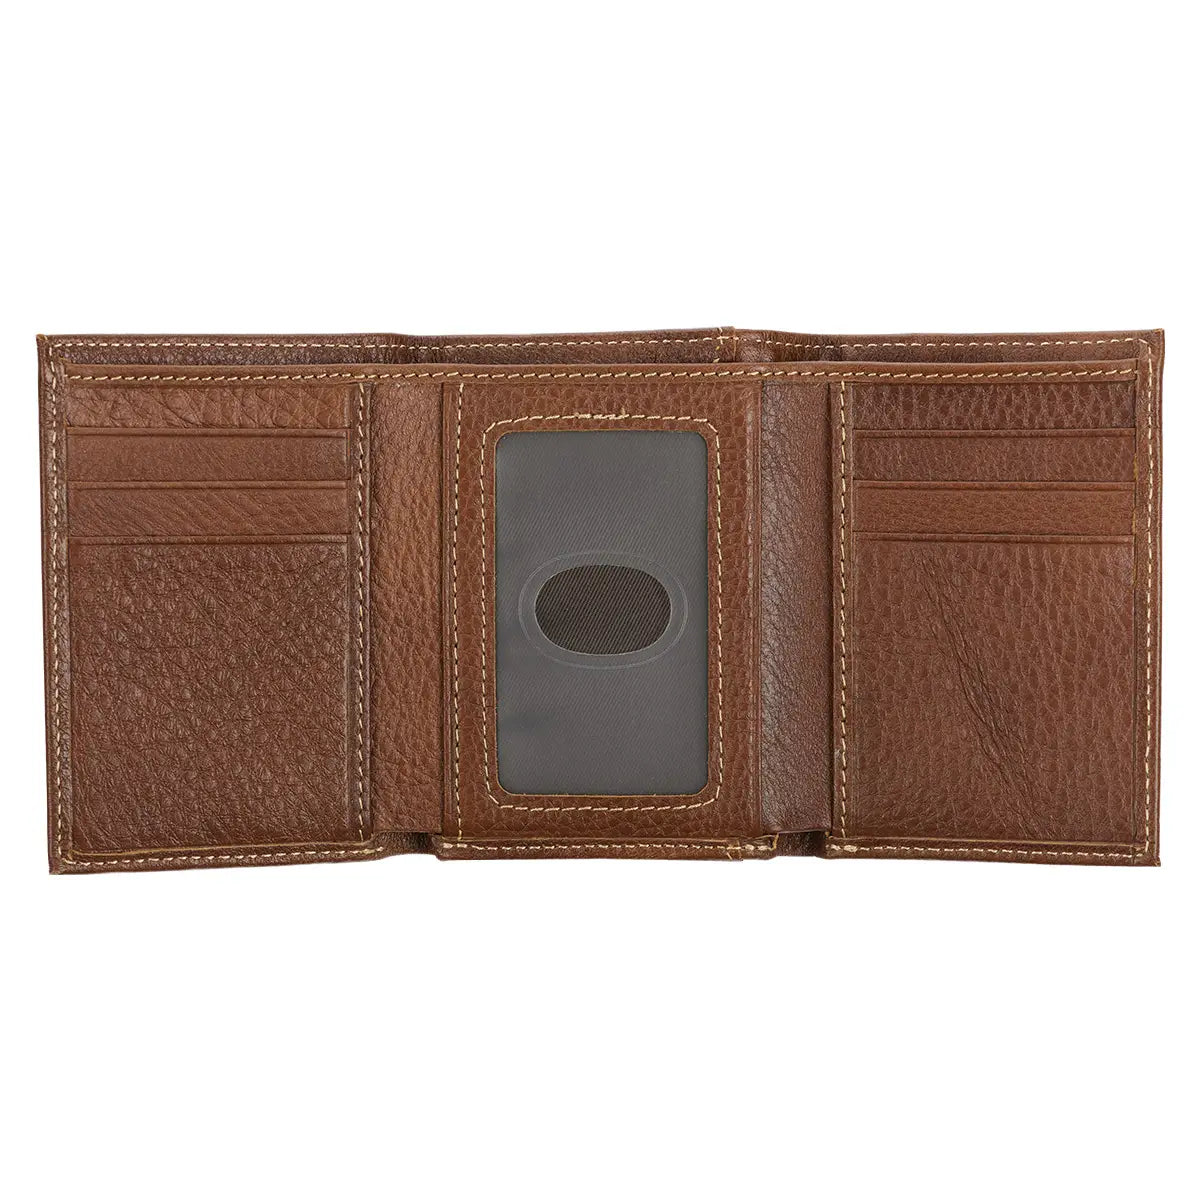 Mens Leather Wallet WT019